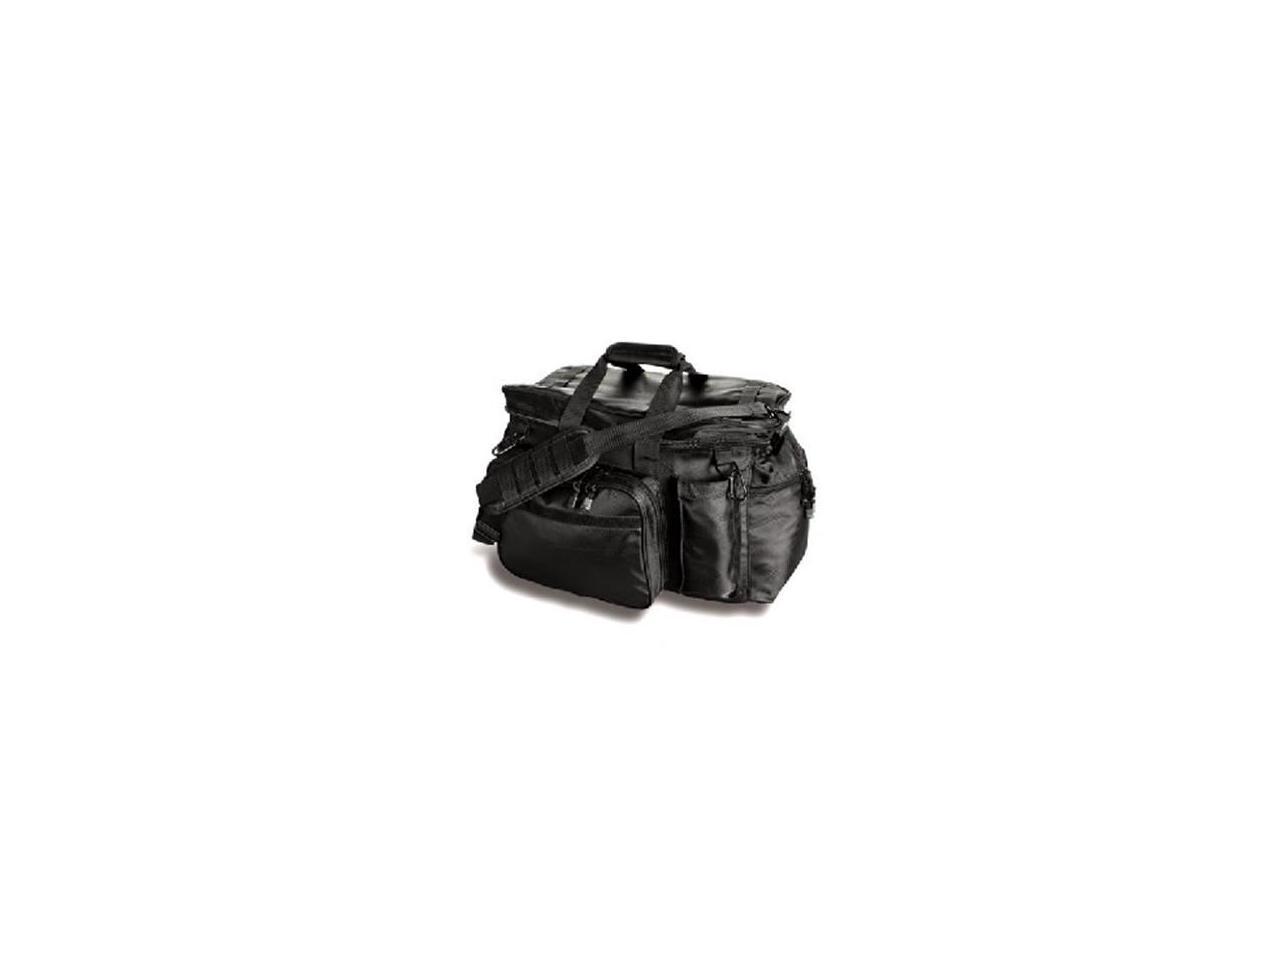 Uncle Mikes Side-Armor Equipment Bag Black 53471 